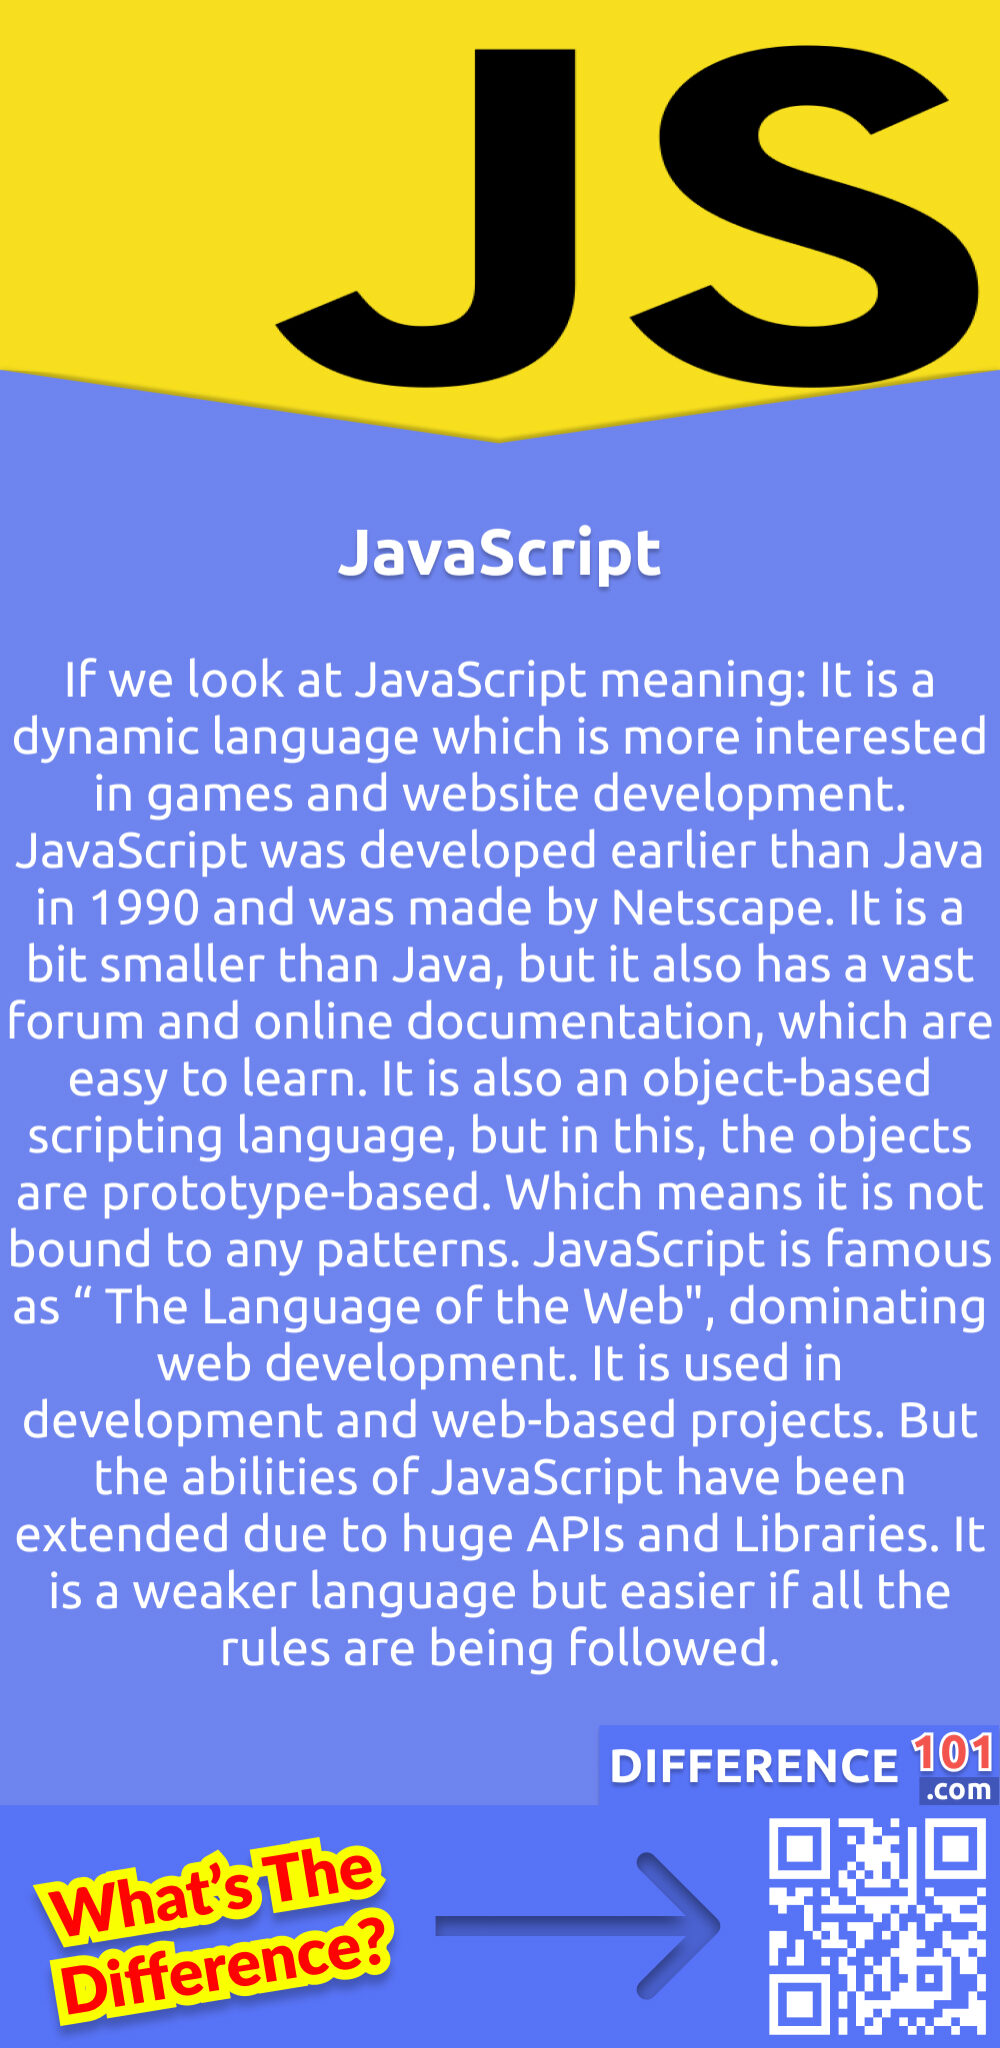 What Is JavaScript? If we look at JavaScript meaning: It is a dynamic language which is more interested in games and website development. JavaScript was developed earlier than Java in 1990 and was made by Netscape. It is a bit smaller than Java, but it also has a vast forum and online documentation, which are easy to learn. It is also an object-based scripting language, but in this, the objects are prototype-based. Which means it is not bound to any patterns. JavaScript is famous as “ The Language of the Web", dominating web development. It is used in development and web-based projects. But the abilities of JavaScript have been extended due to huge APIs and Libraries. It is a weaker language but easier if all the rules are being followed.